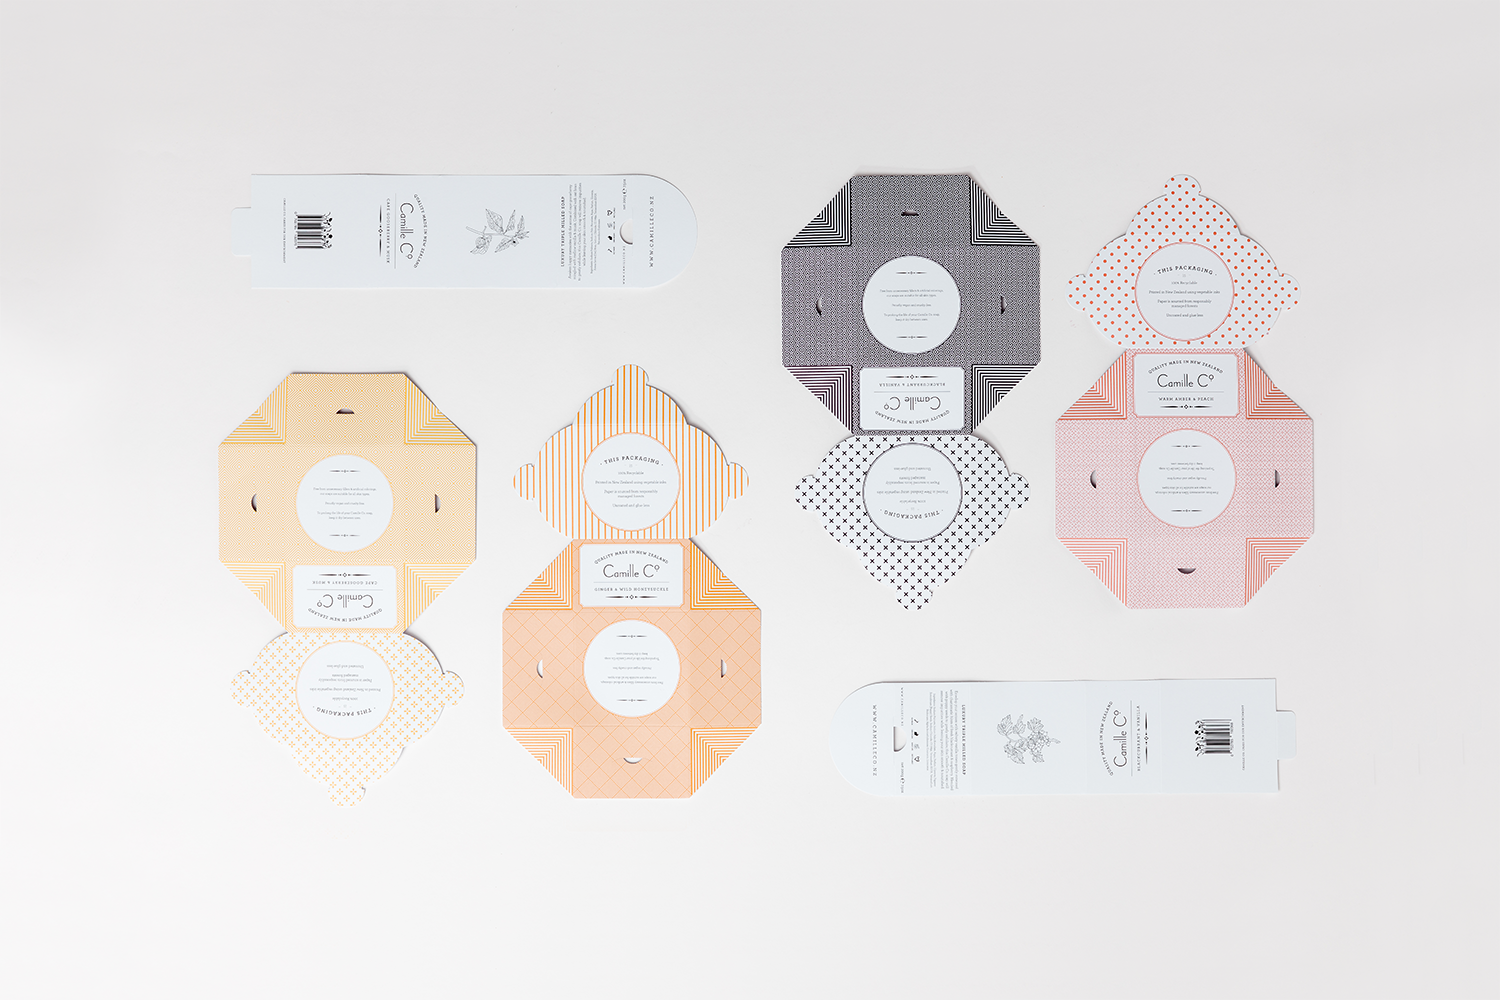 Camille Co. Soap and Candle Packaging Design